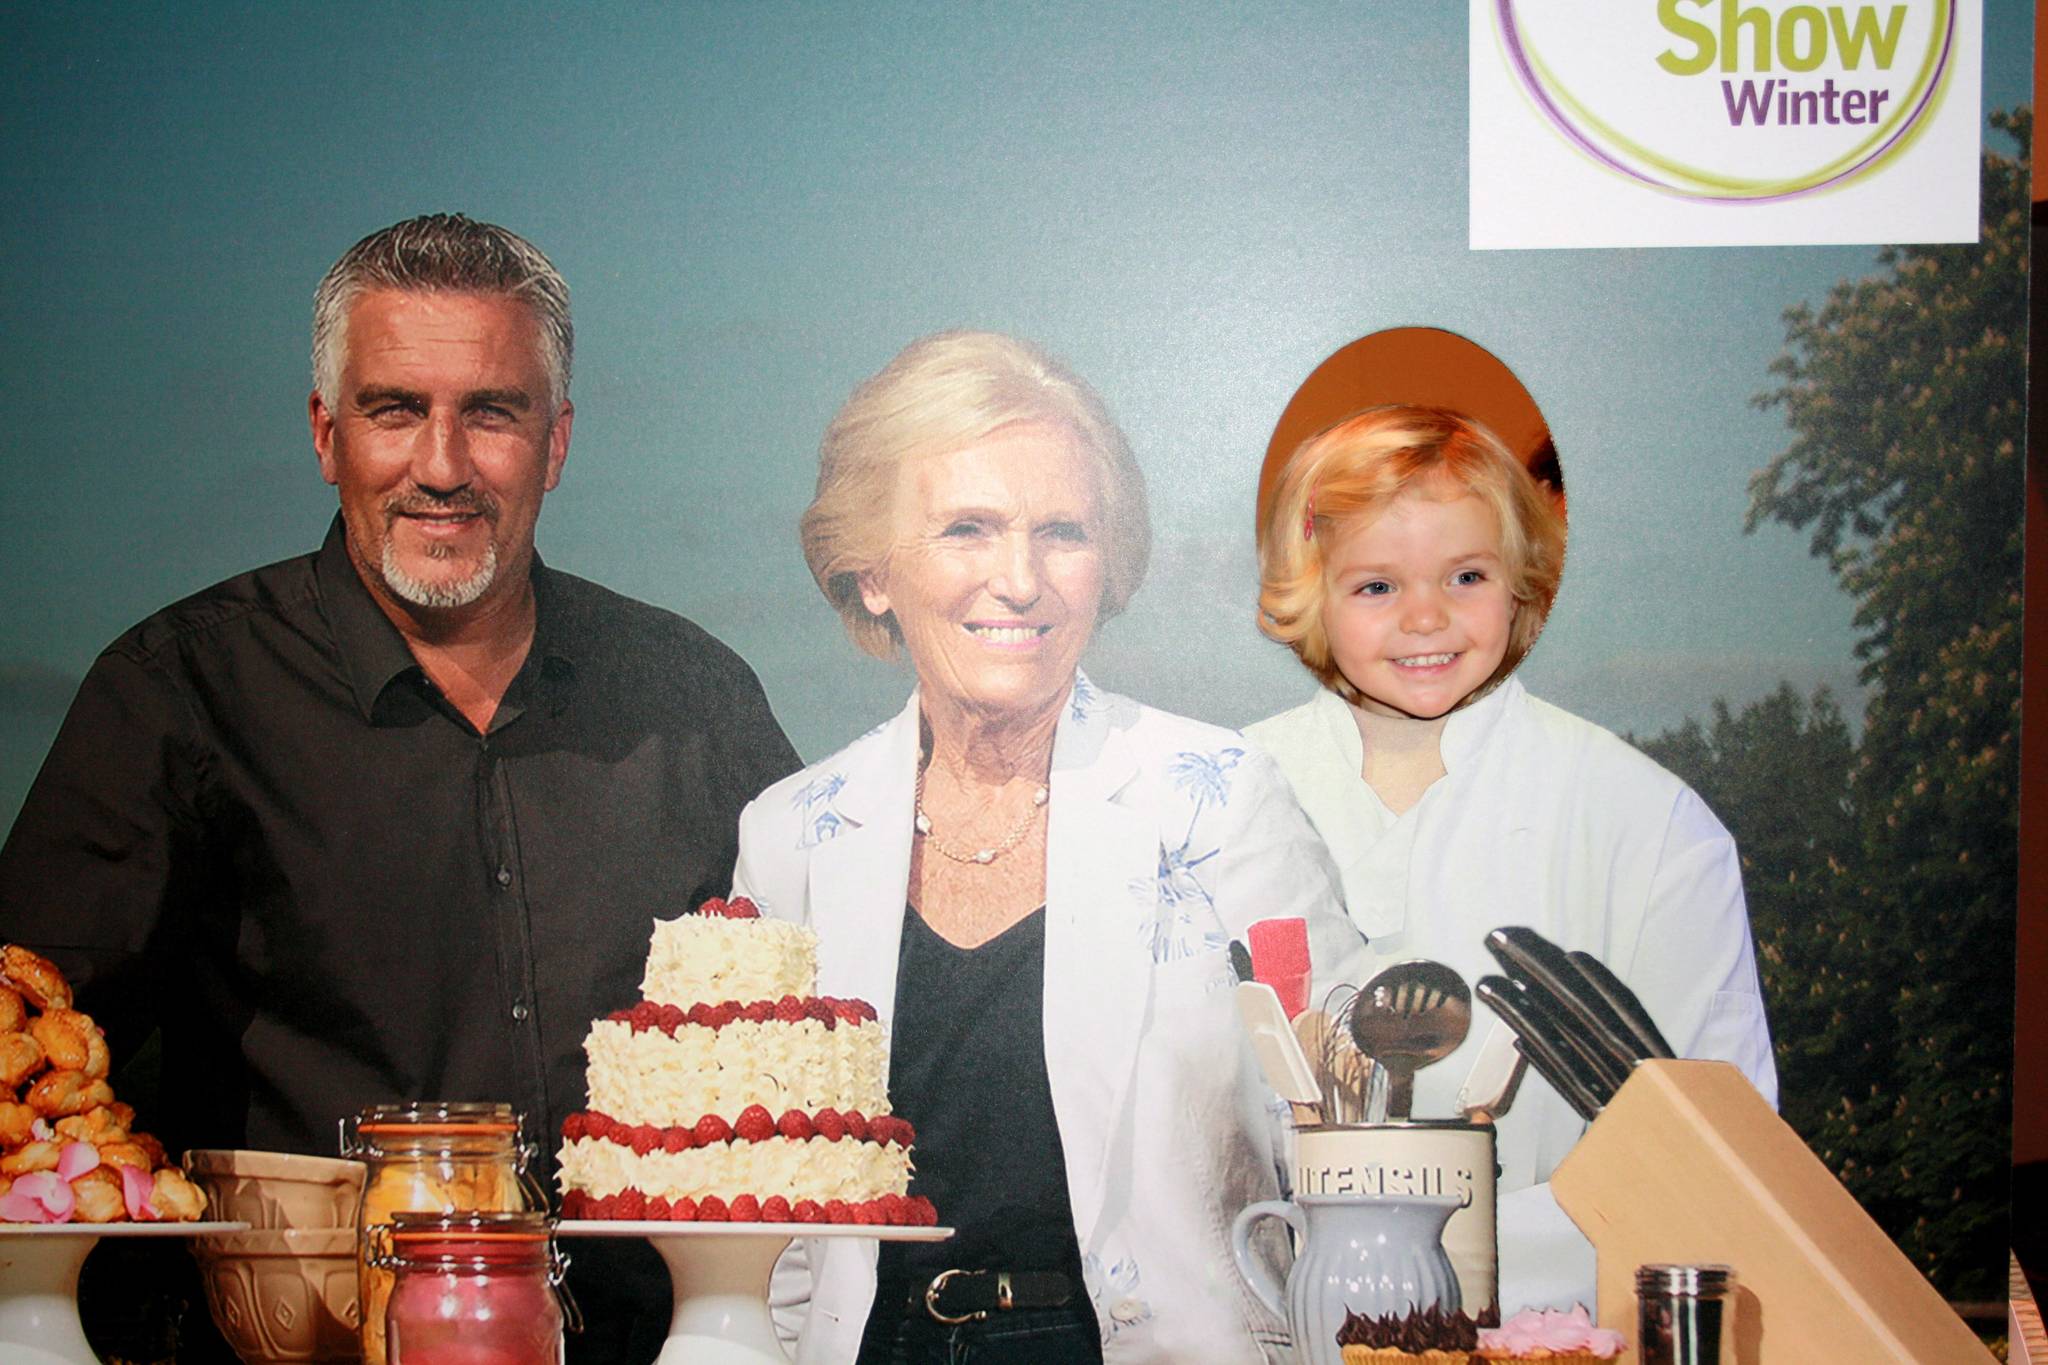 Bake Off's popularity continues to rise